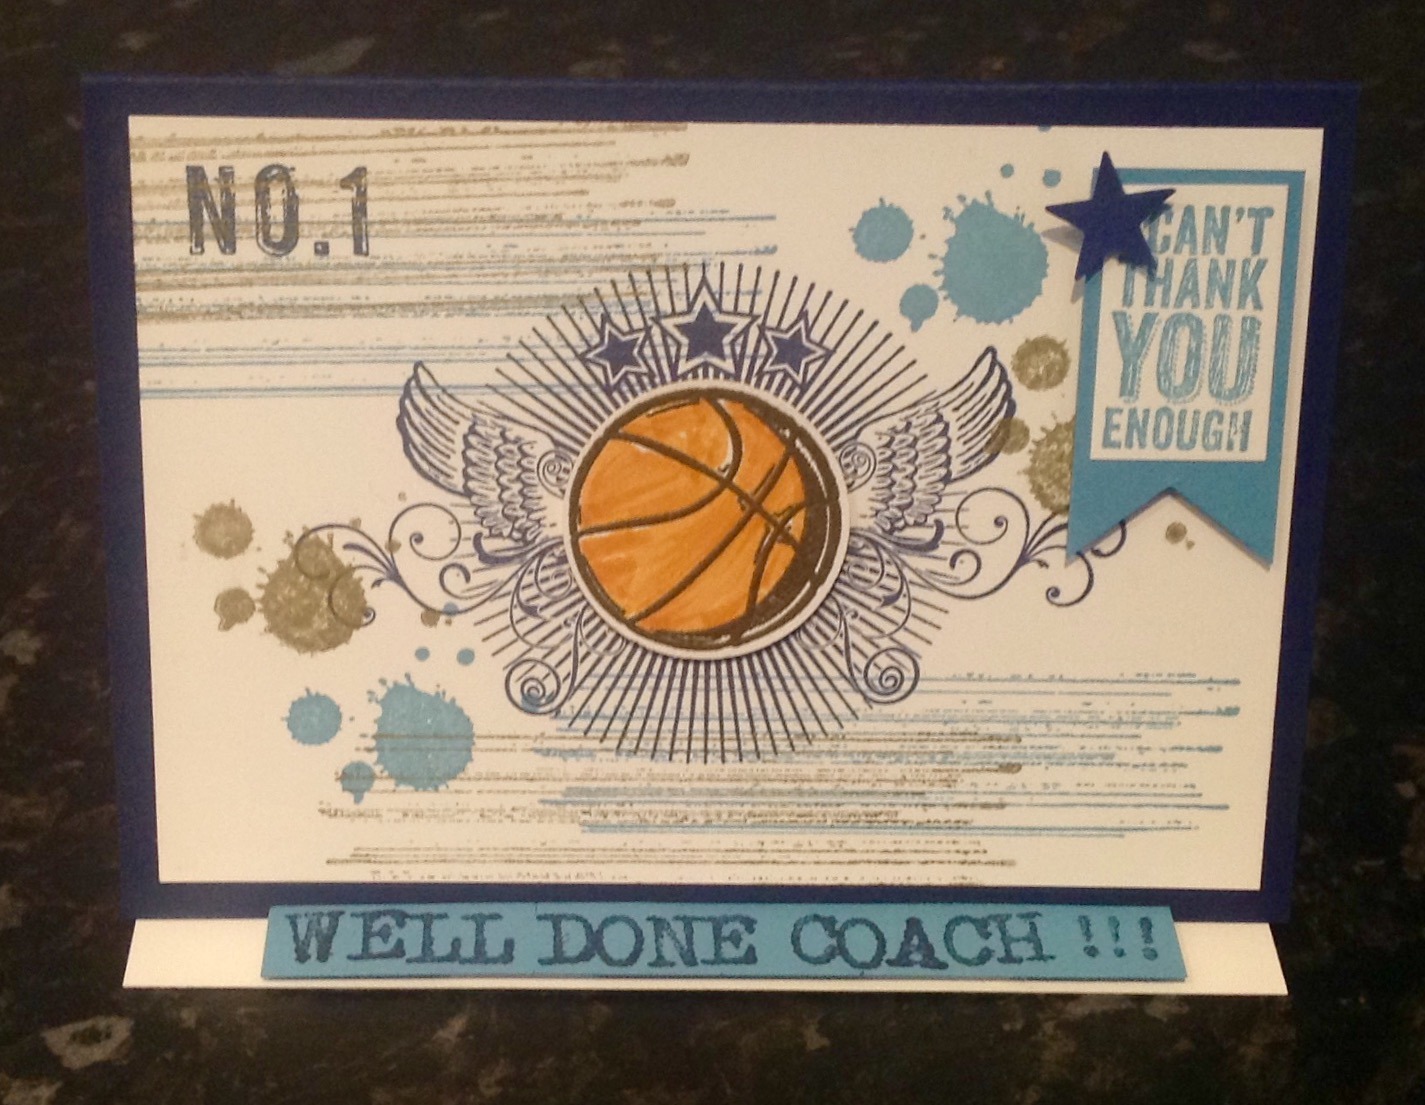 Gorgeous Grunge stamp set used to make a basketball card for a coach.